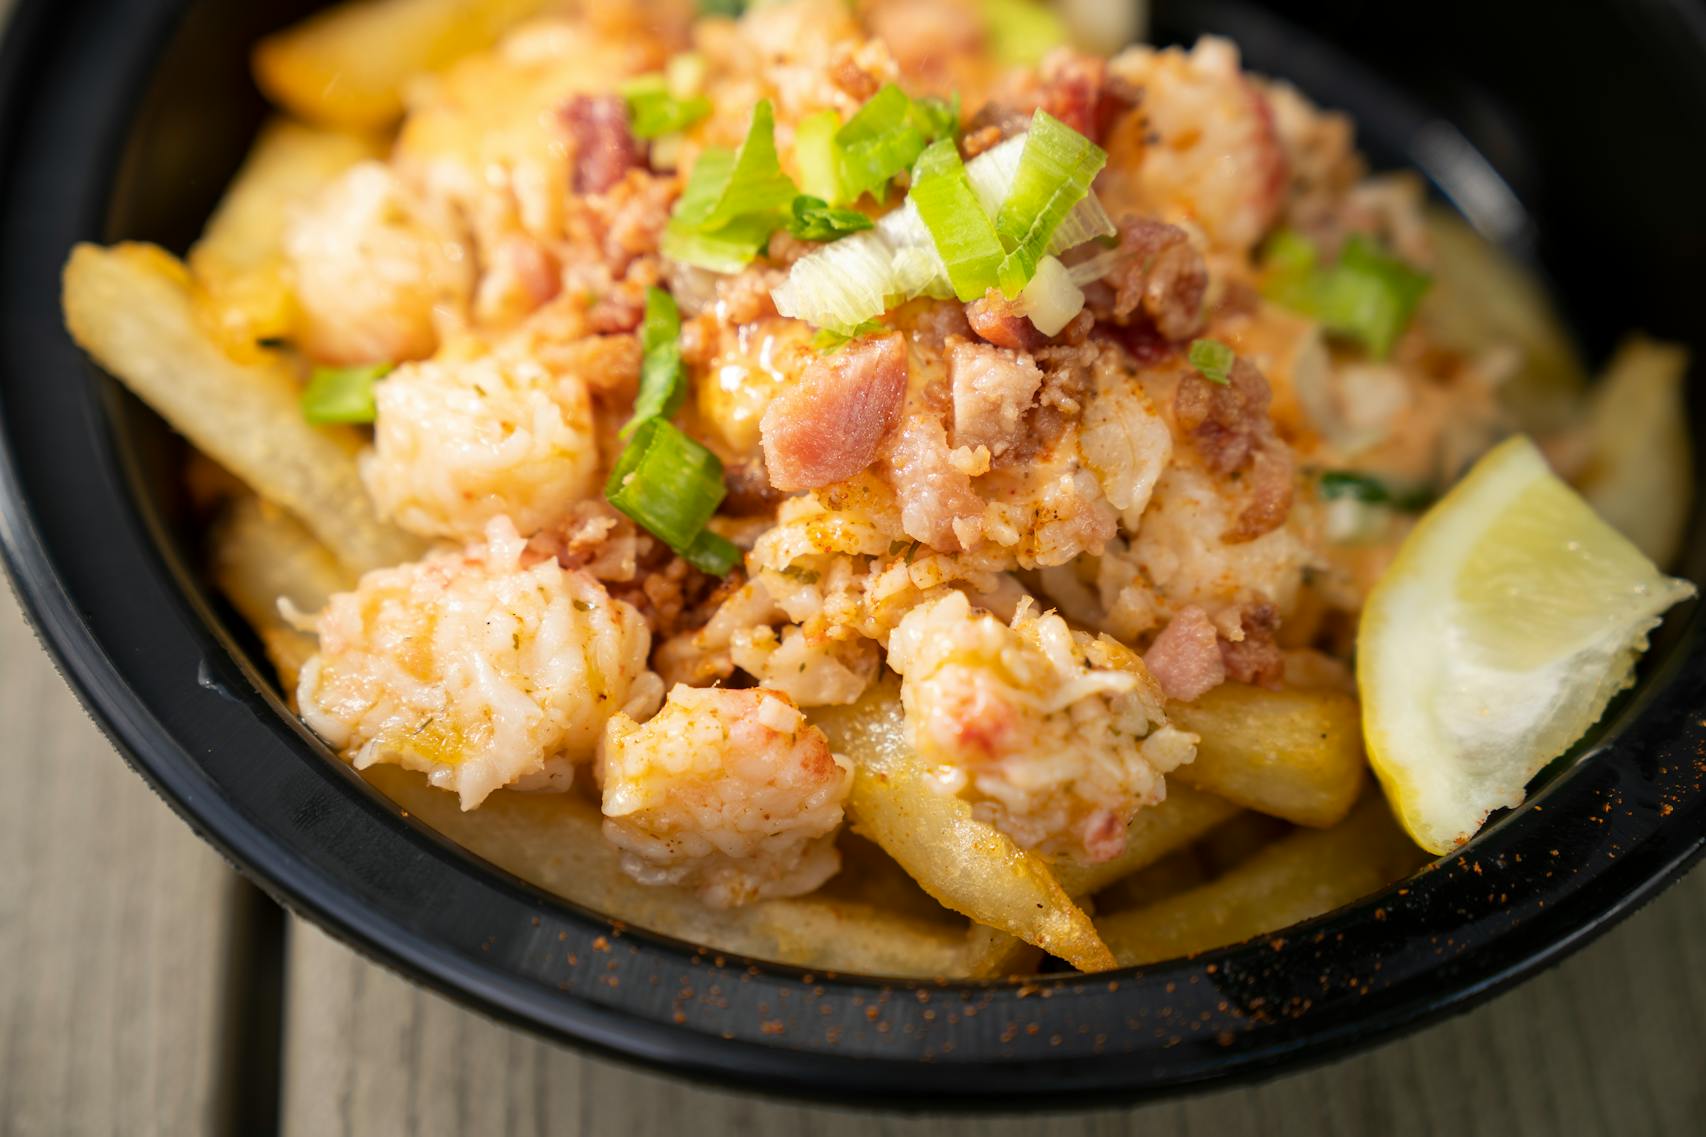 Loaded Lobster Fries from Cafe Caribe. The new foods of the 2023 Minnesota State Fair photographed on the first day of the fair in Falcon Heights, Minn. on Tuesday, Aug. 8, 2023. ] LEILA NAVIDI • leila.navidi@startribune.com